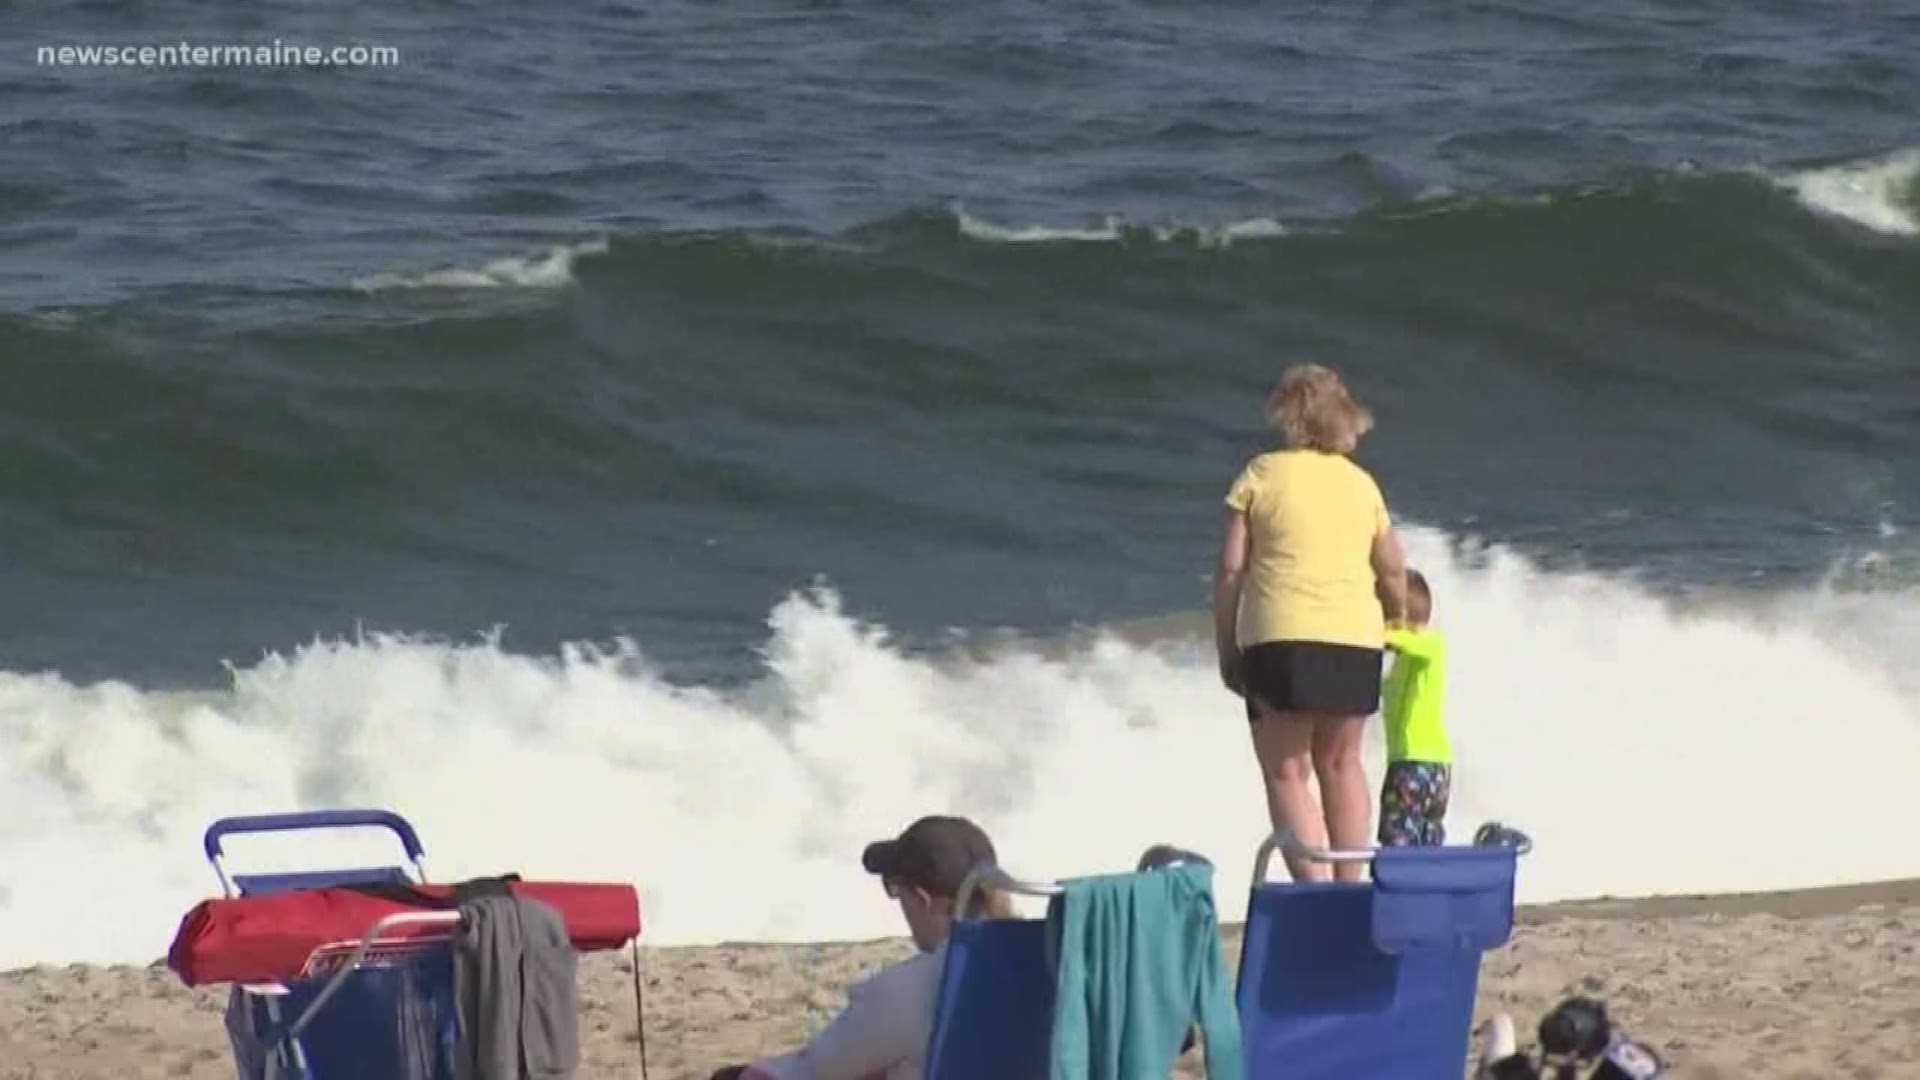 2 dead after being caught in dangerous ocean currents in NH